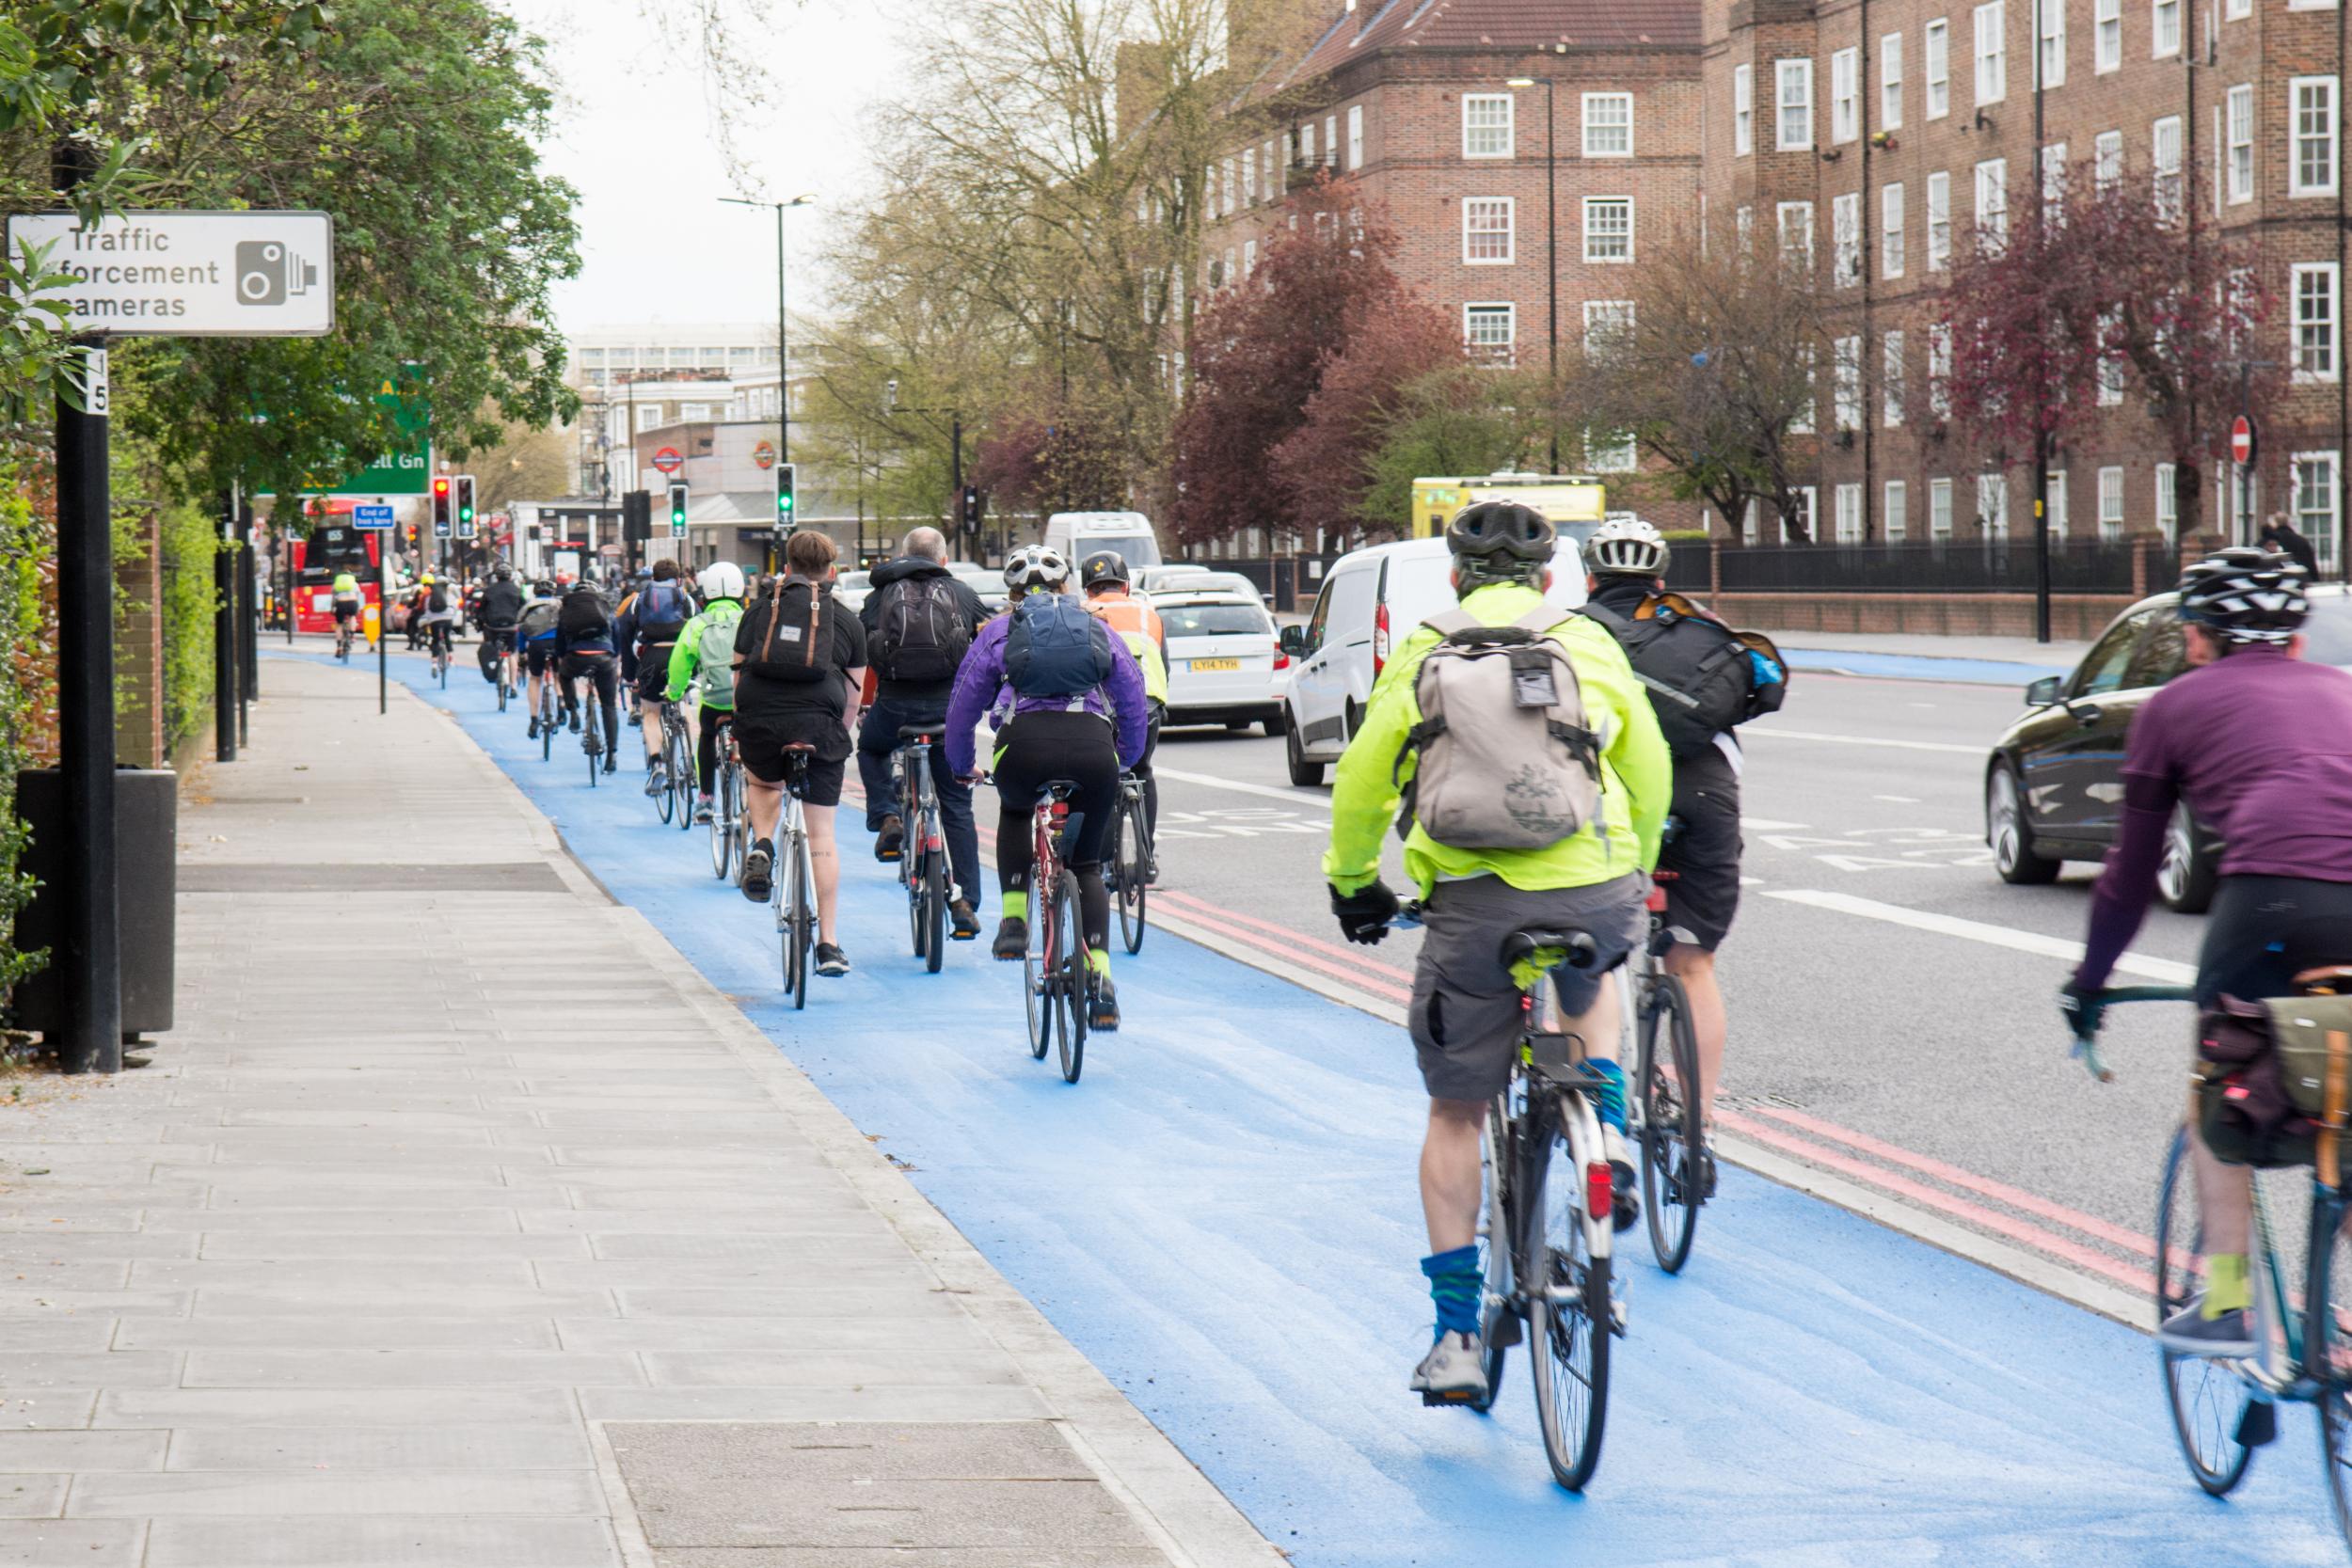 Pop-up cycle lanes across London could be made permanent after pandemic, says transport boss thumbnail